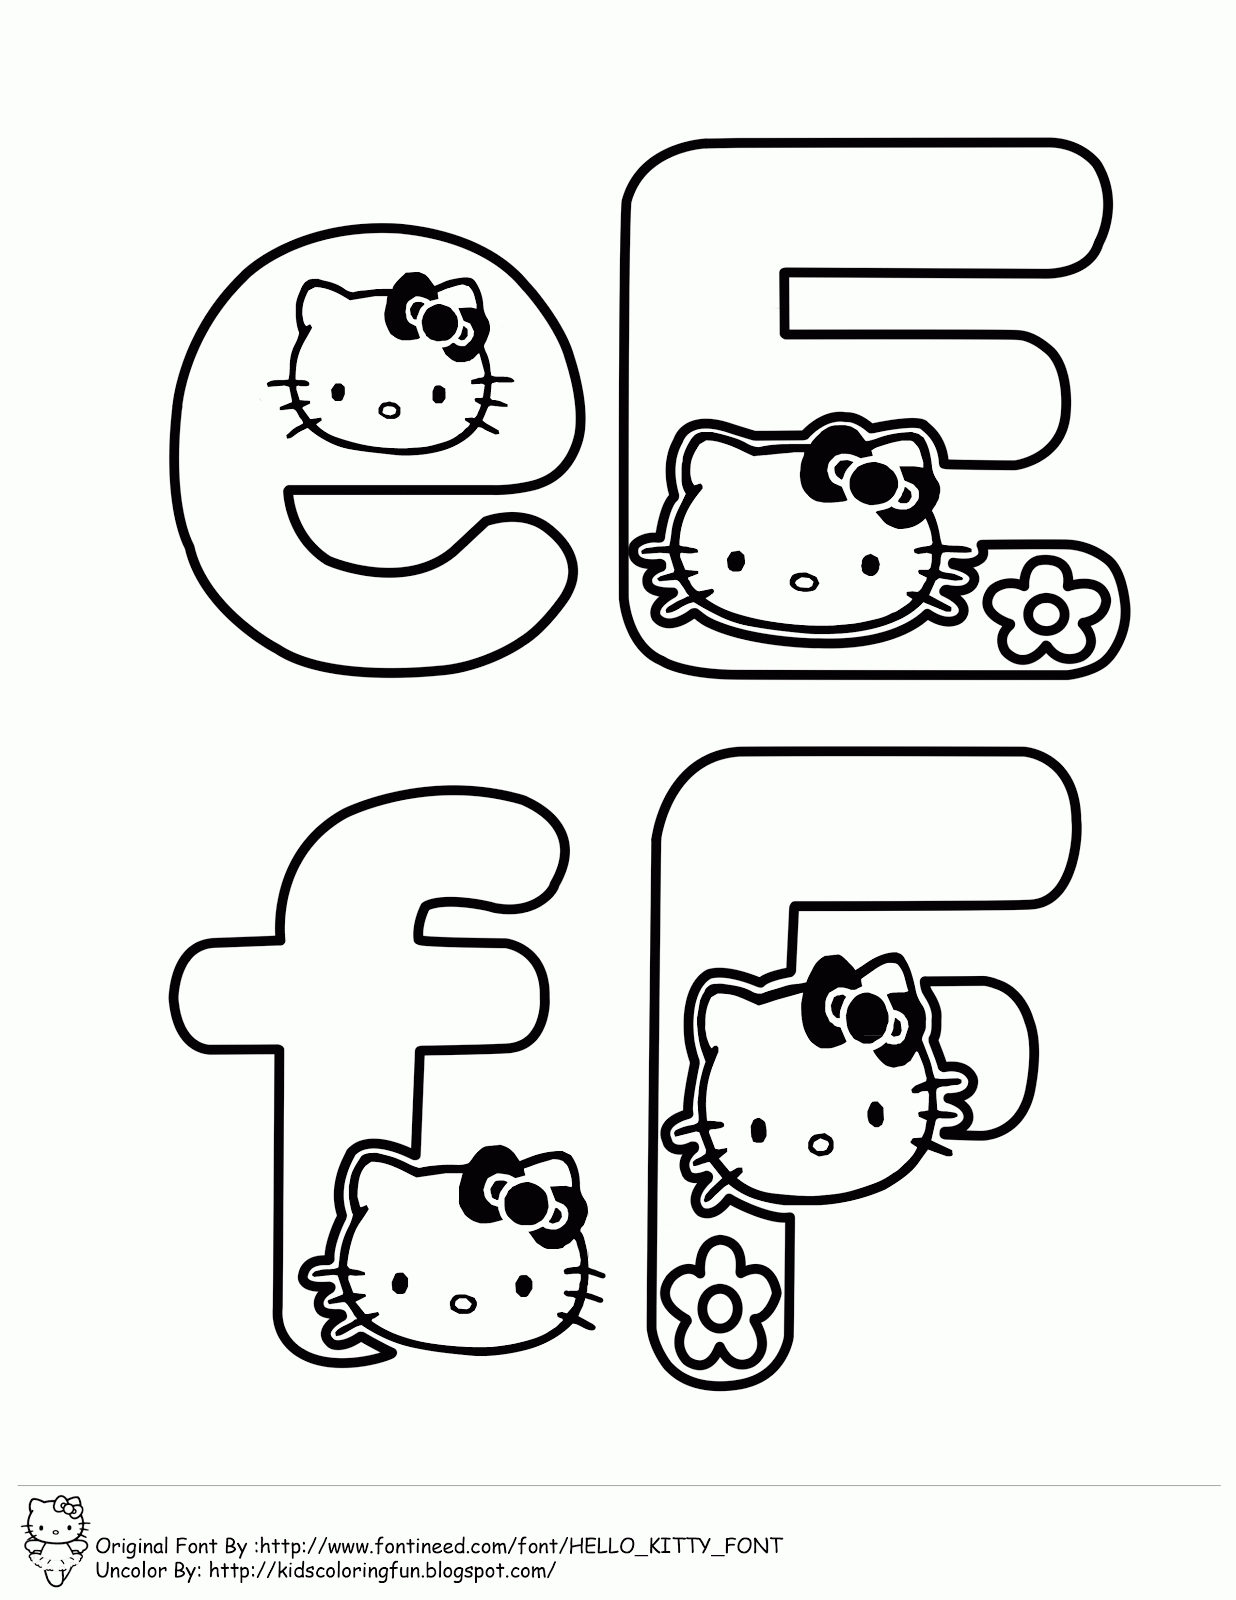 Learning ABC With Hello Kitty | Fantasy Coloring Pages